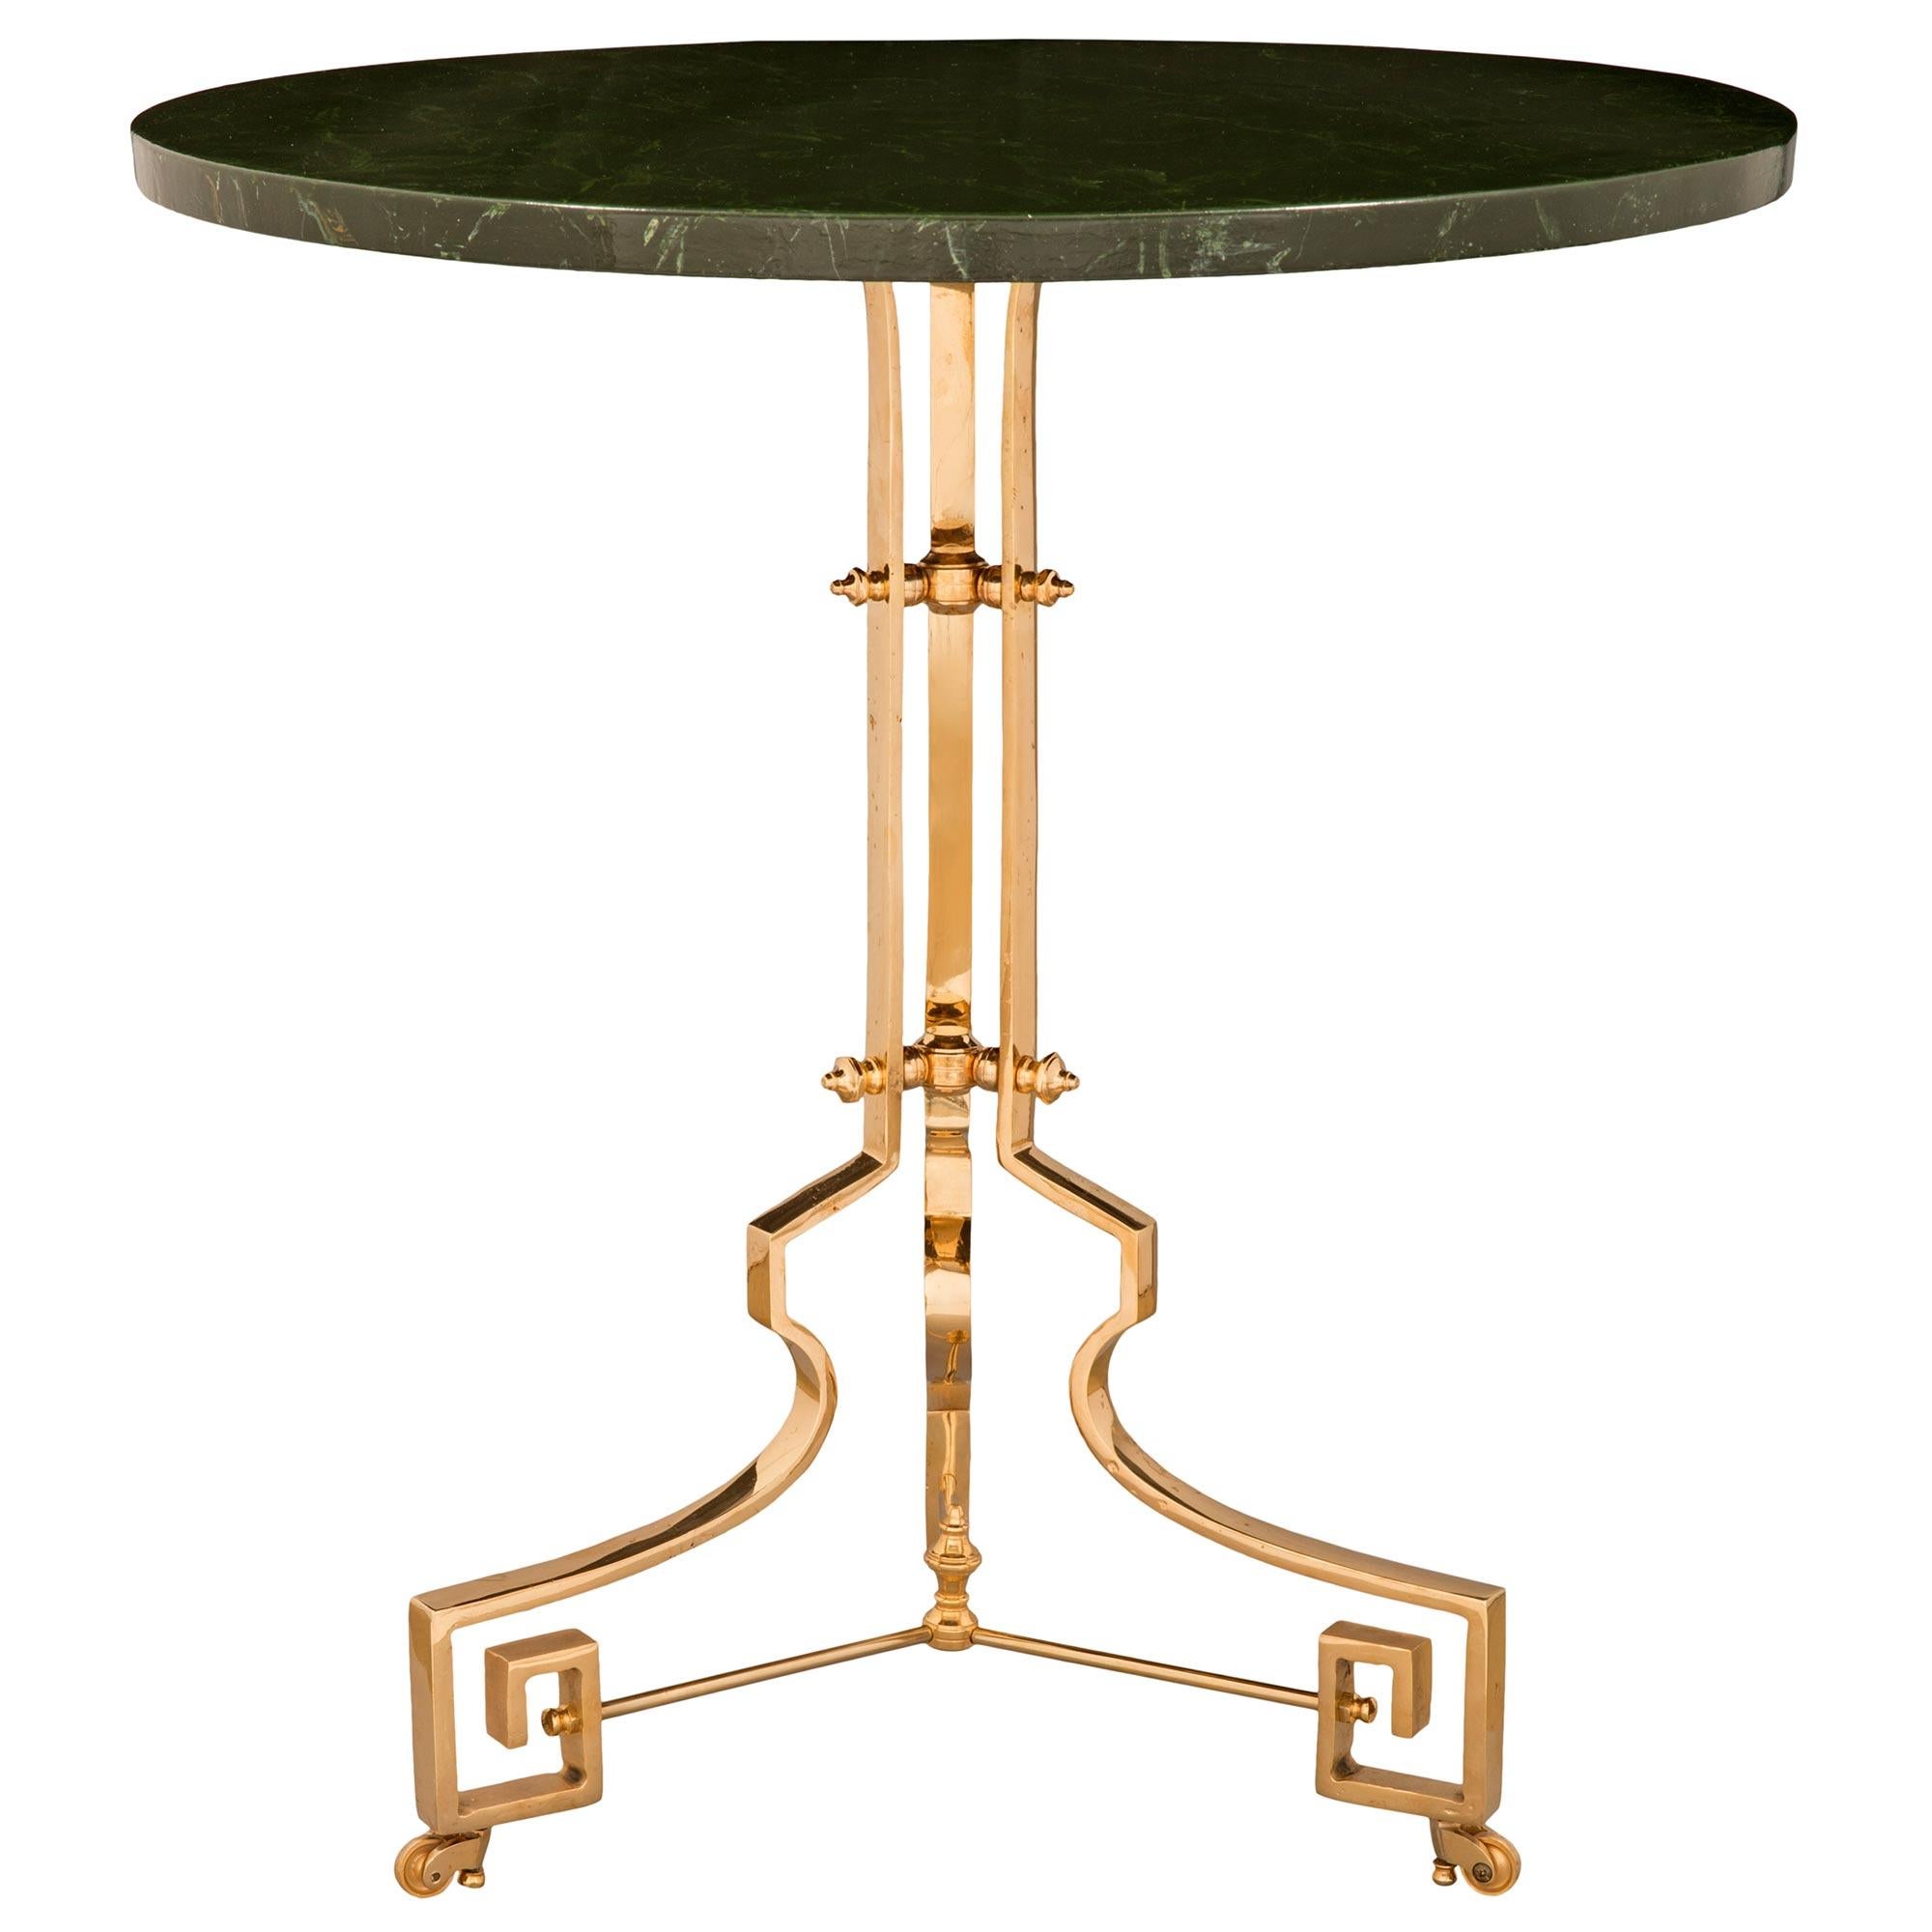 A unique and exceptionally decorative pair of French 19th century Neo-Classical st. ormolu and faux painted marble tilt top side tables. The tables are raised by superb Greek key shaped feet above their original casters leading up to the beautiful